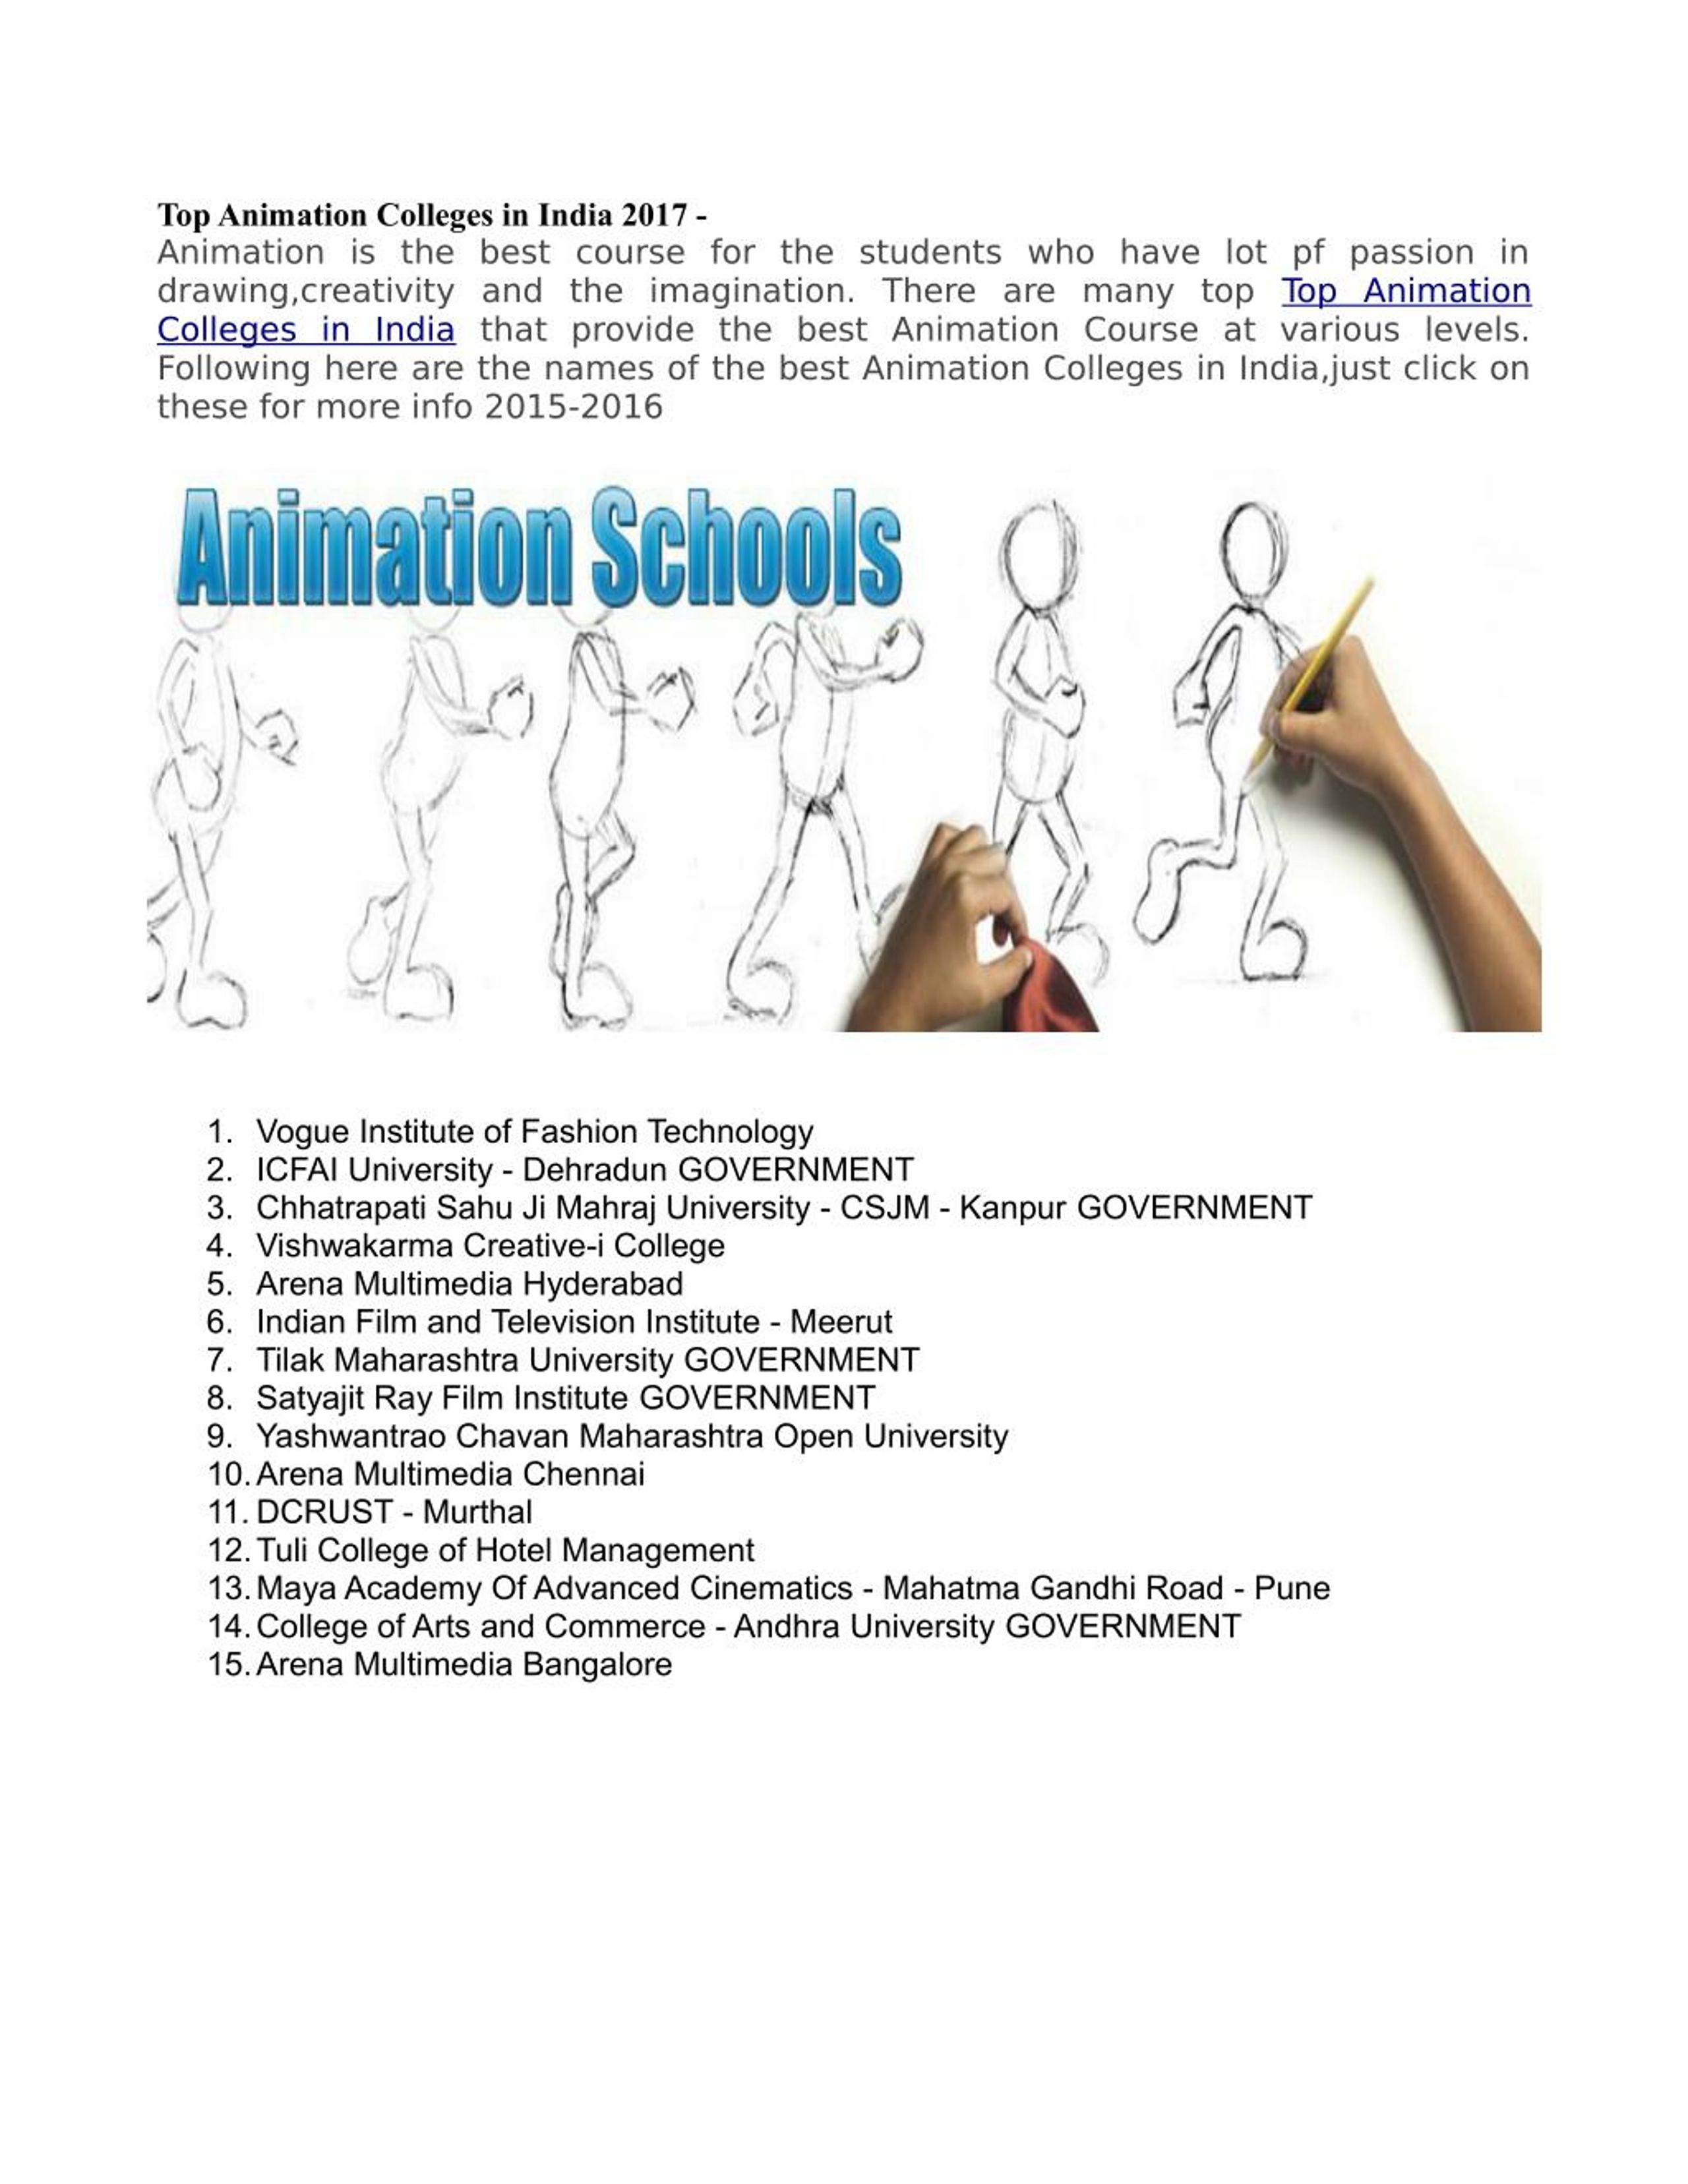 PPT - Scope of animation in india and top animation colleges in india  PowerPoint Presentation - ID:7477883